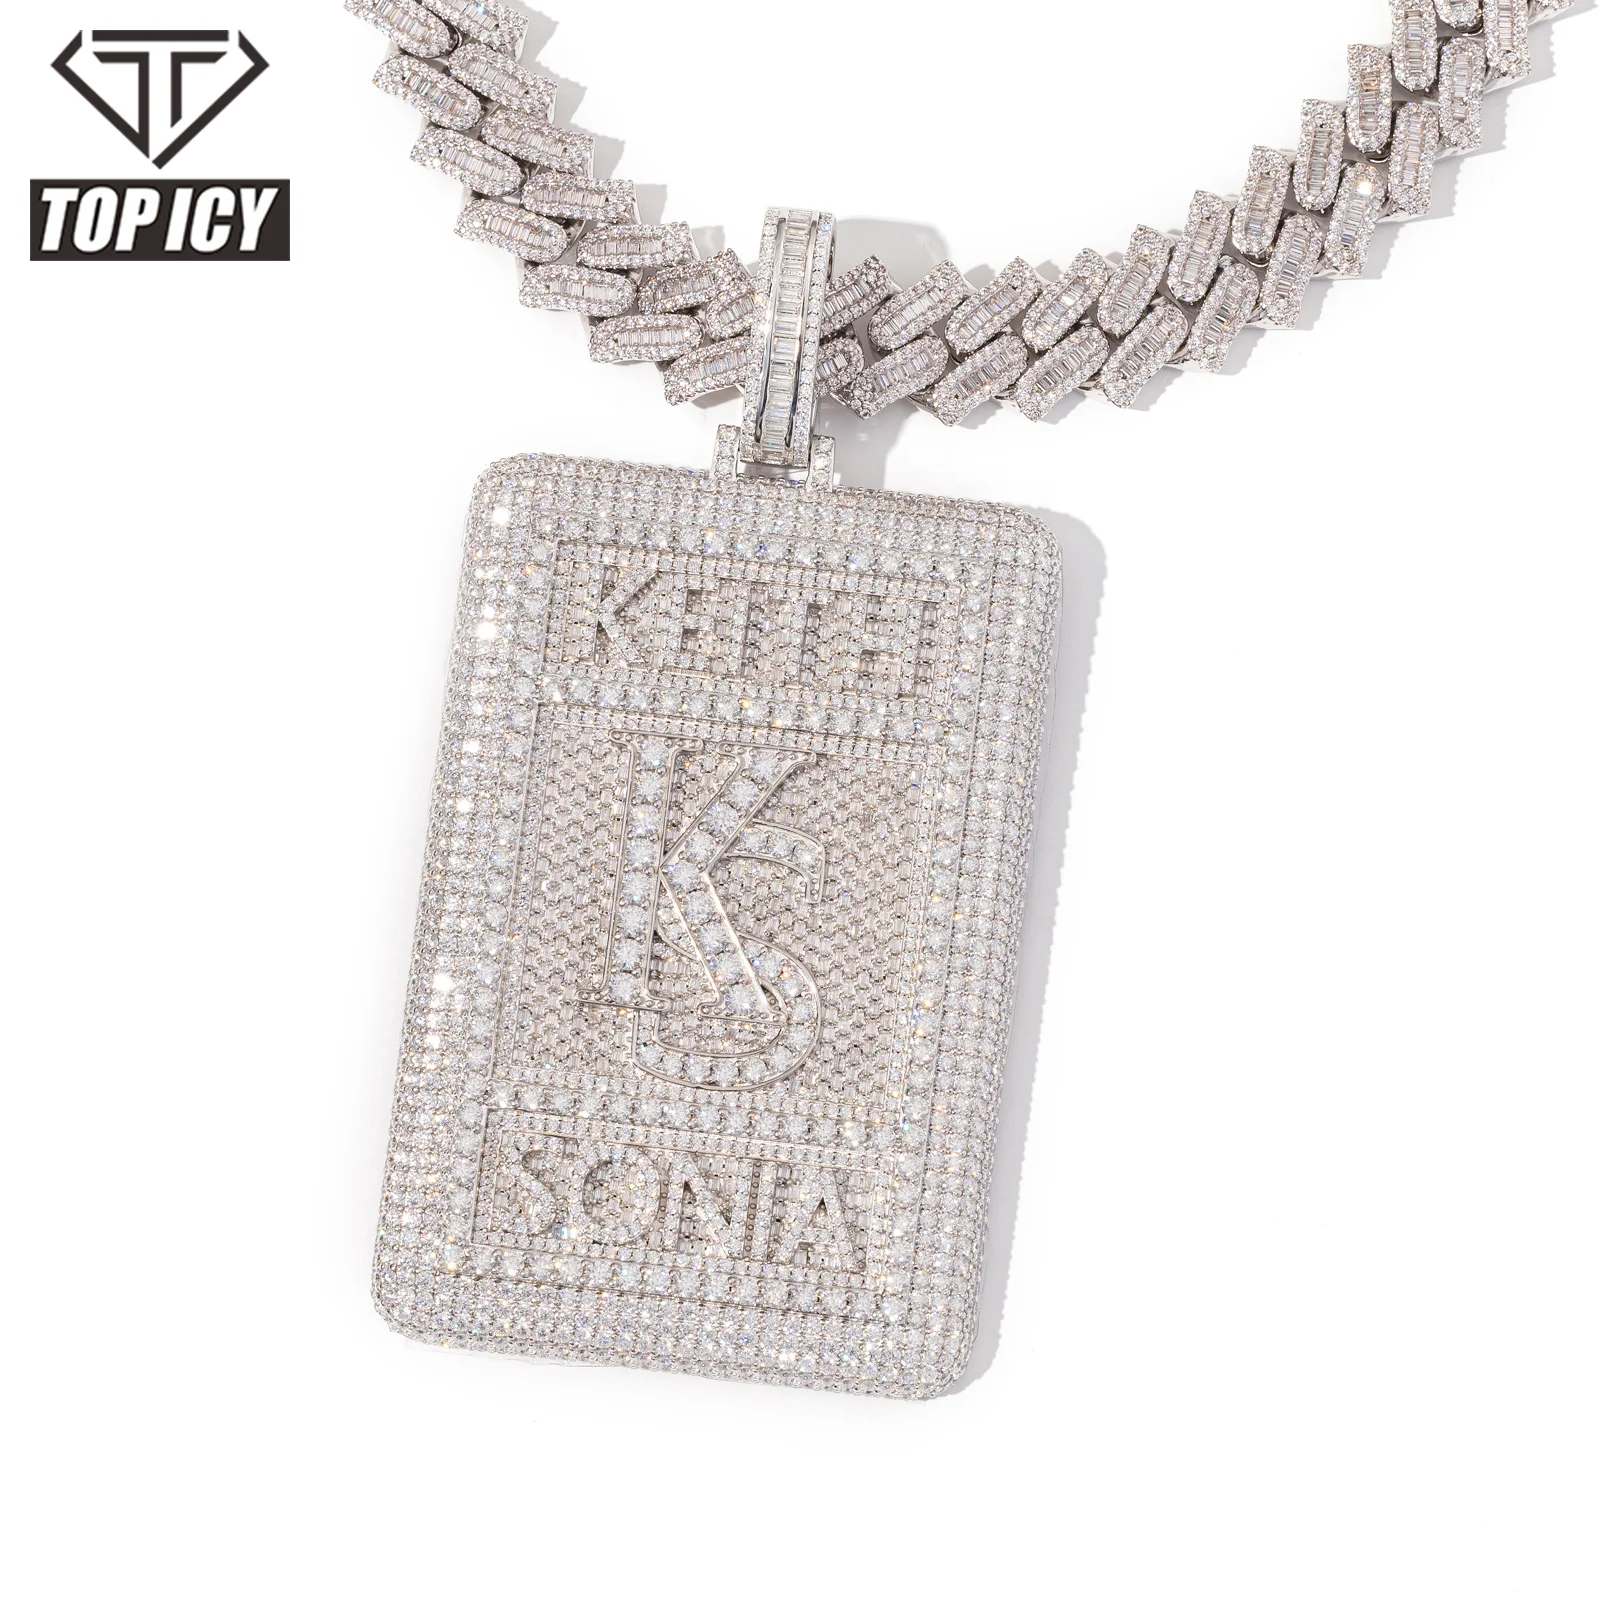 Custom necklace fashion jewelry Sterling silver moissanite icy pendant necklace hip hop jewelry personalized square pendant